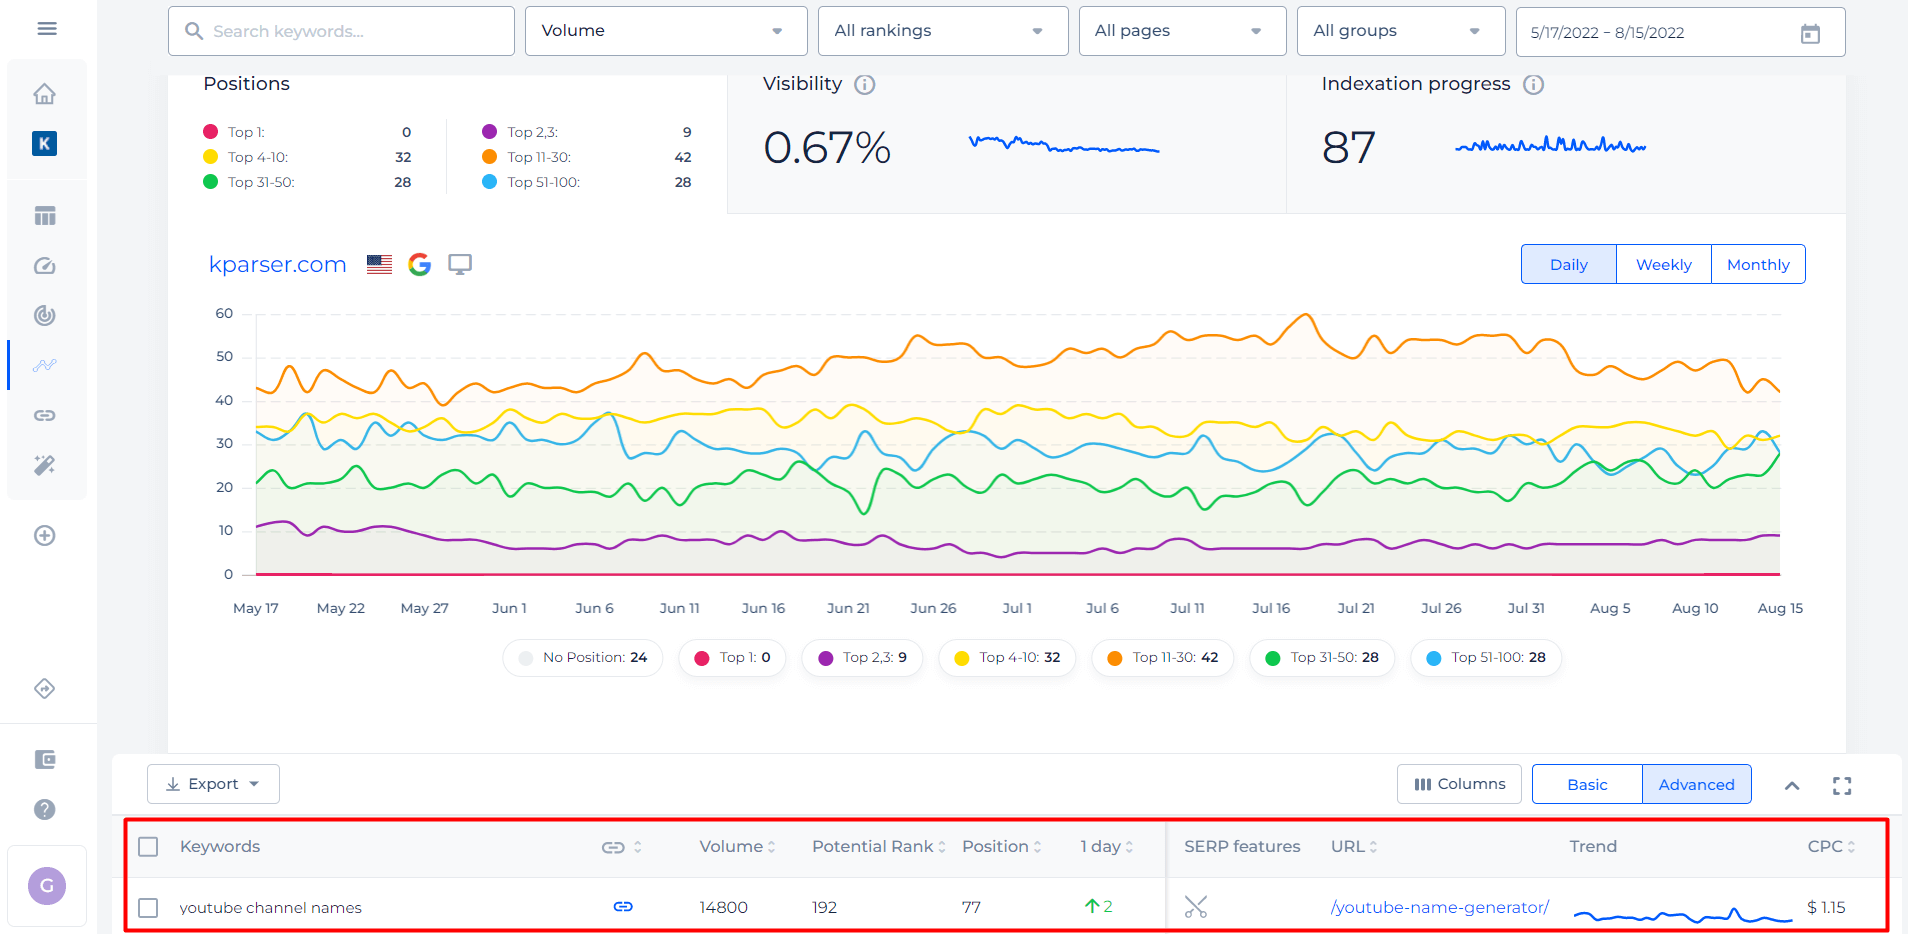 Keyword rank tracking with volume - overview